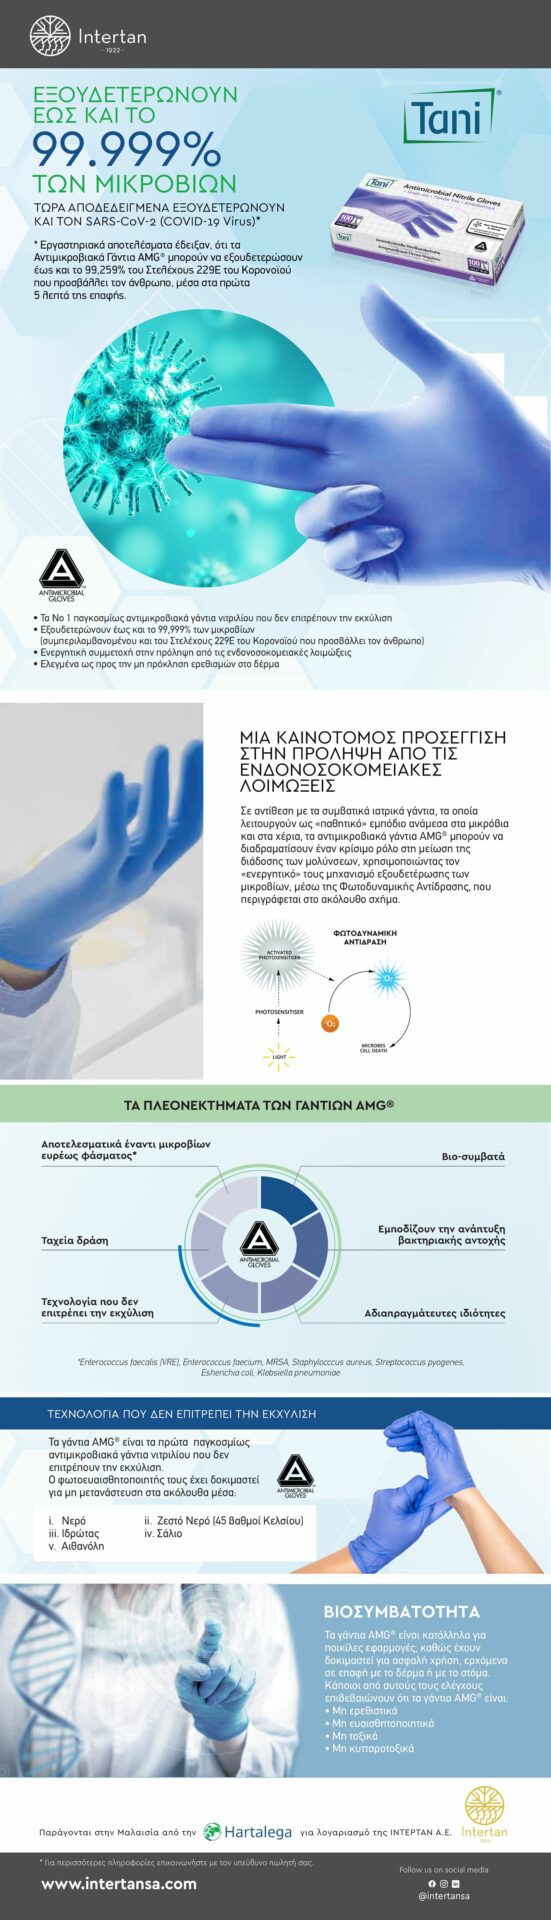 Antimicrobial Gloves Newsletter | ΙΝΤΕΡΤΑΝ Α.Ε.